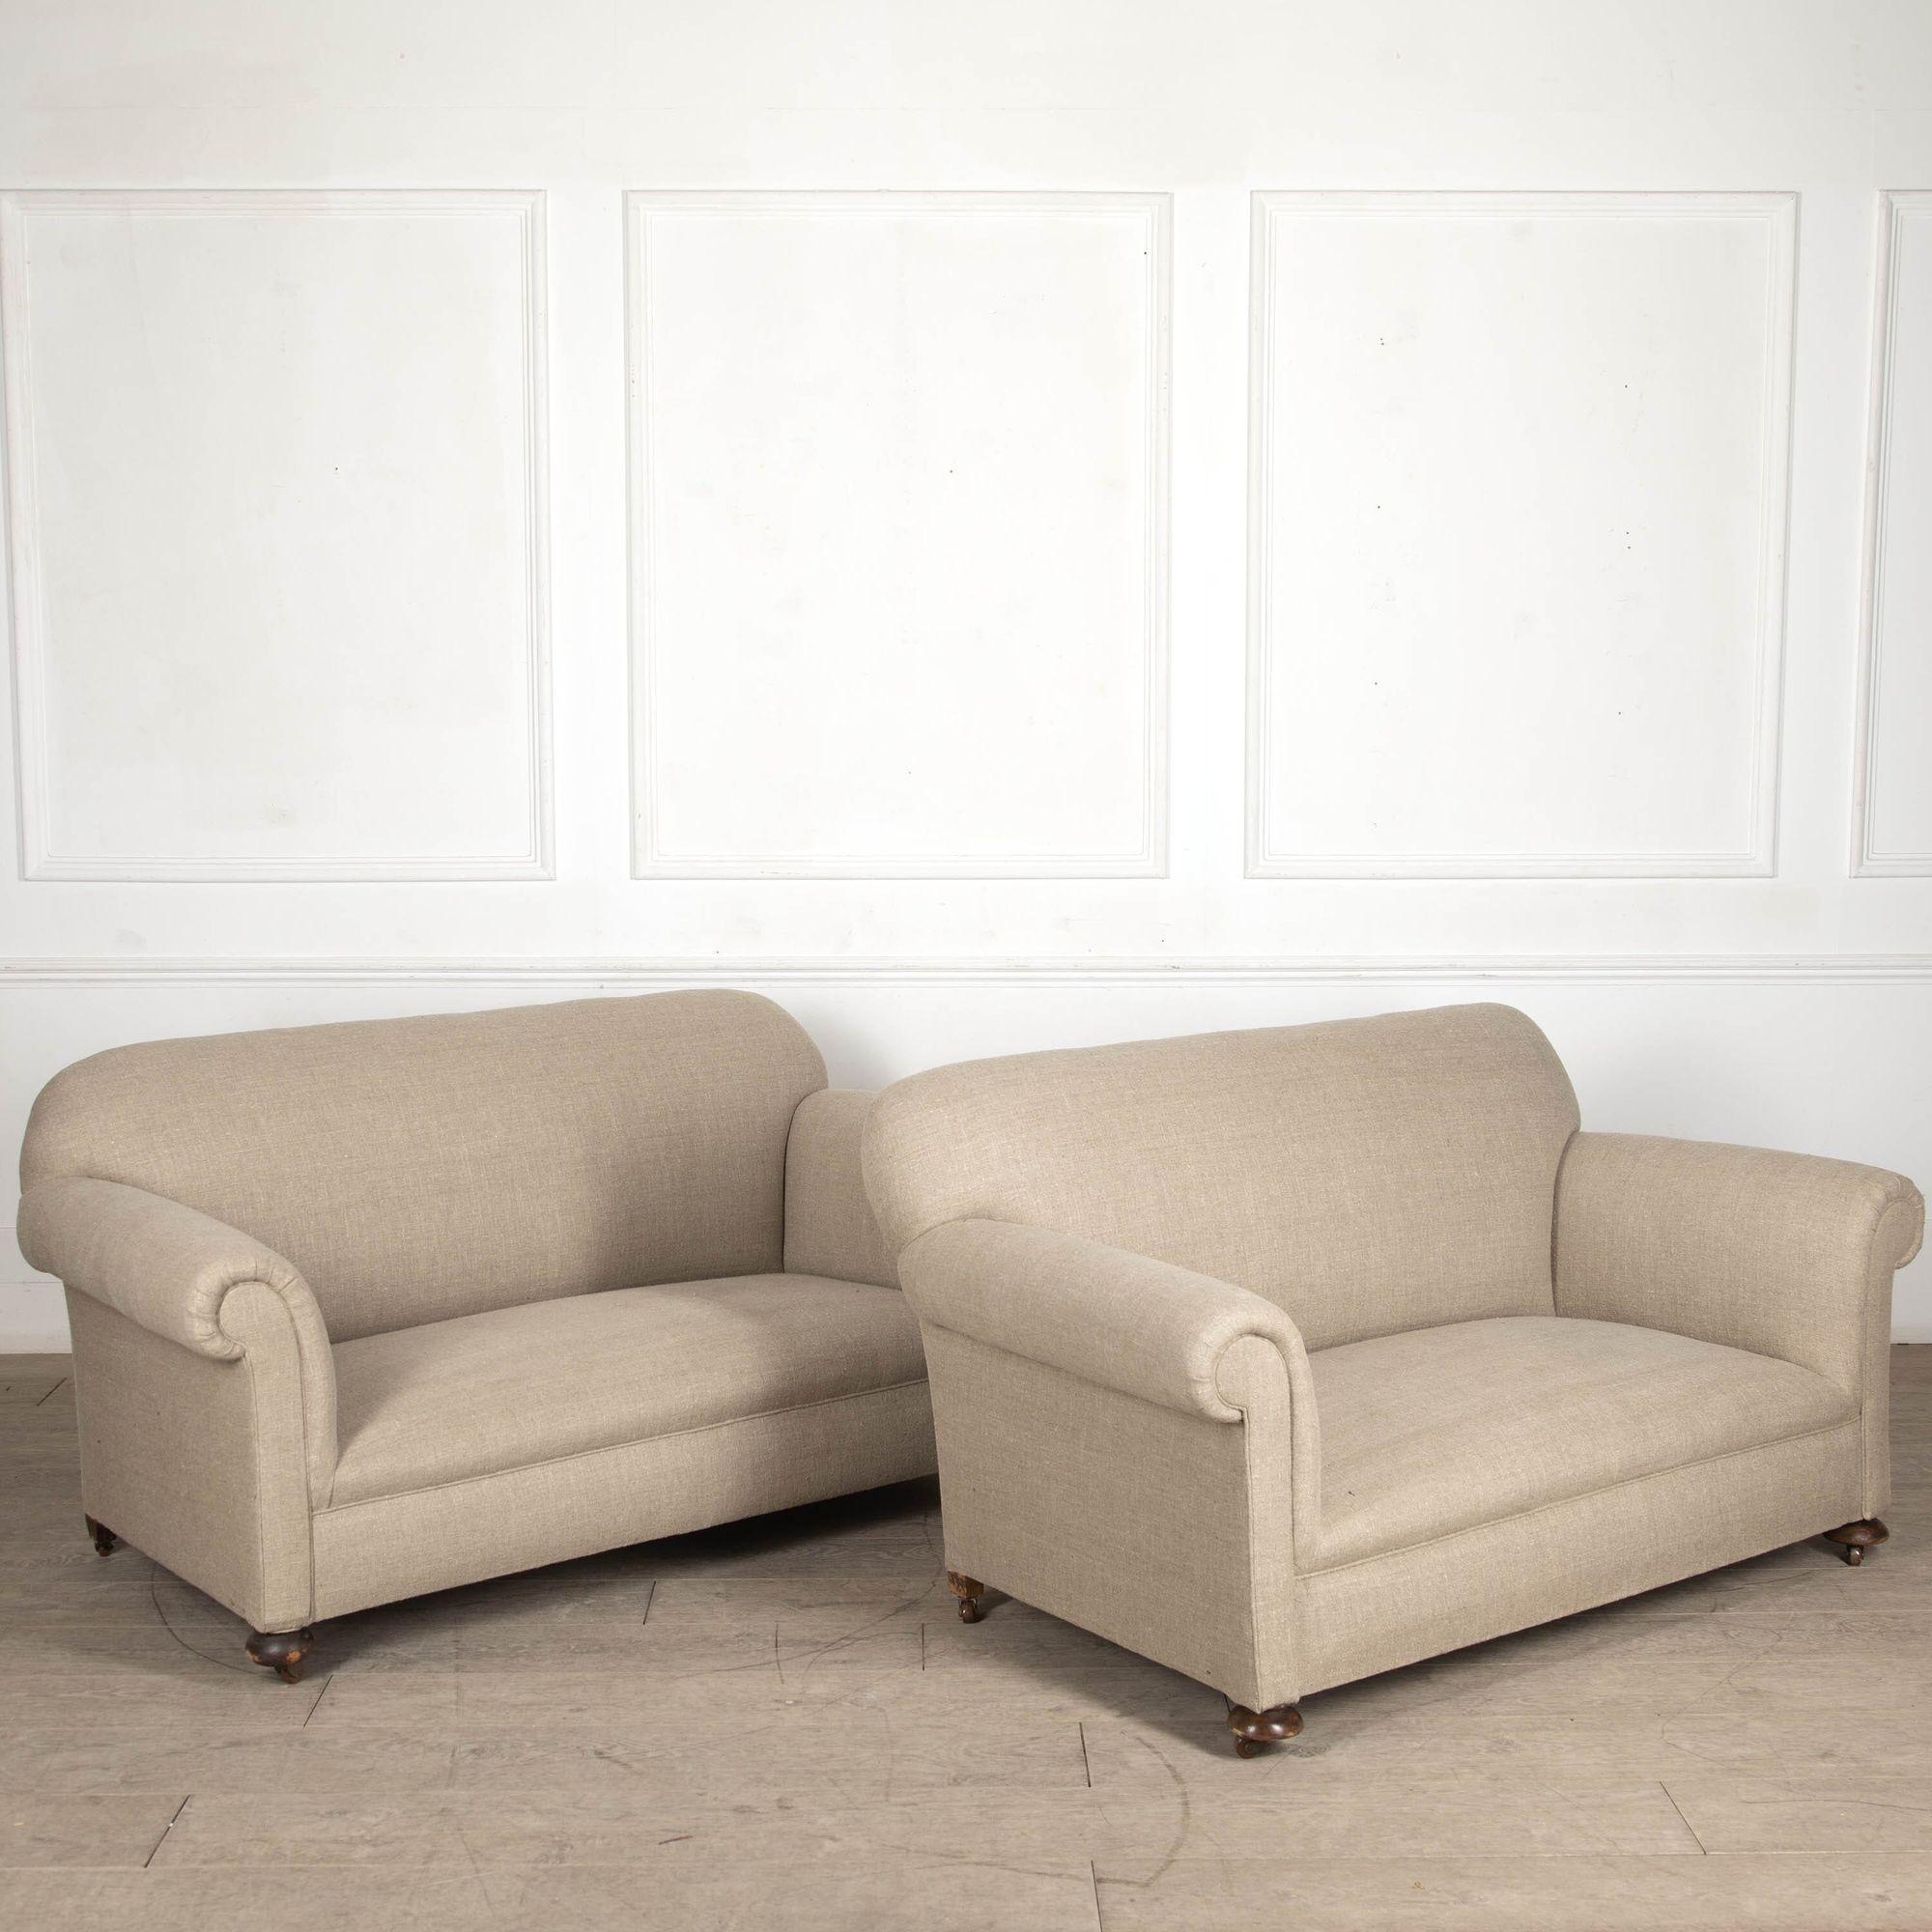 Matched Pair of 20th Century Sofas In Good Condition For Sale In Gloucestershire, GB